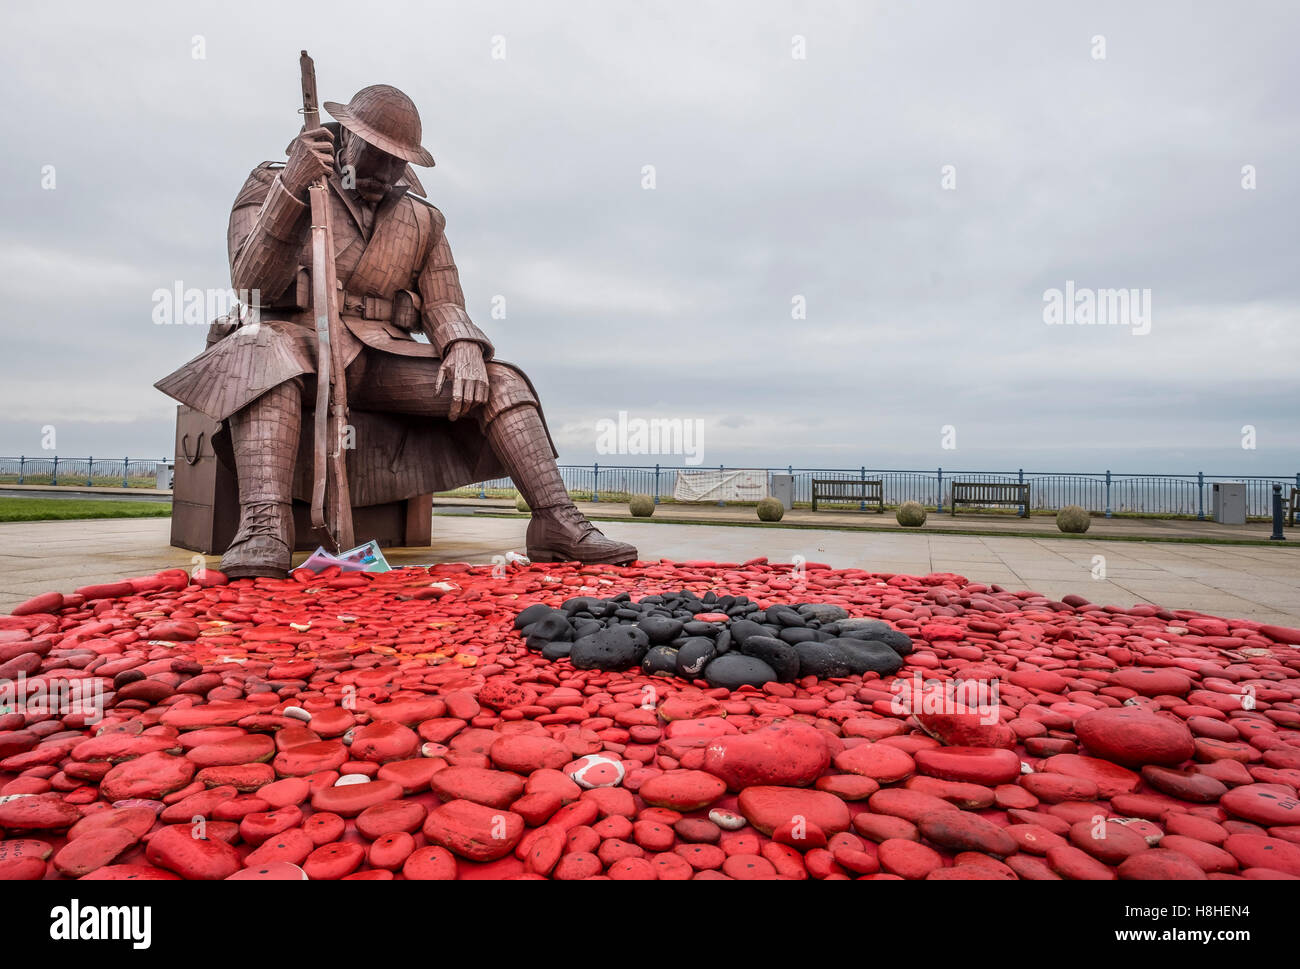 A photo of the war memorial 'Old Tommy' located in Seaham, County Durham, UK. Taken 12 November 2016 Stock Photo